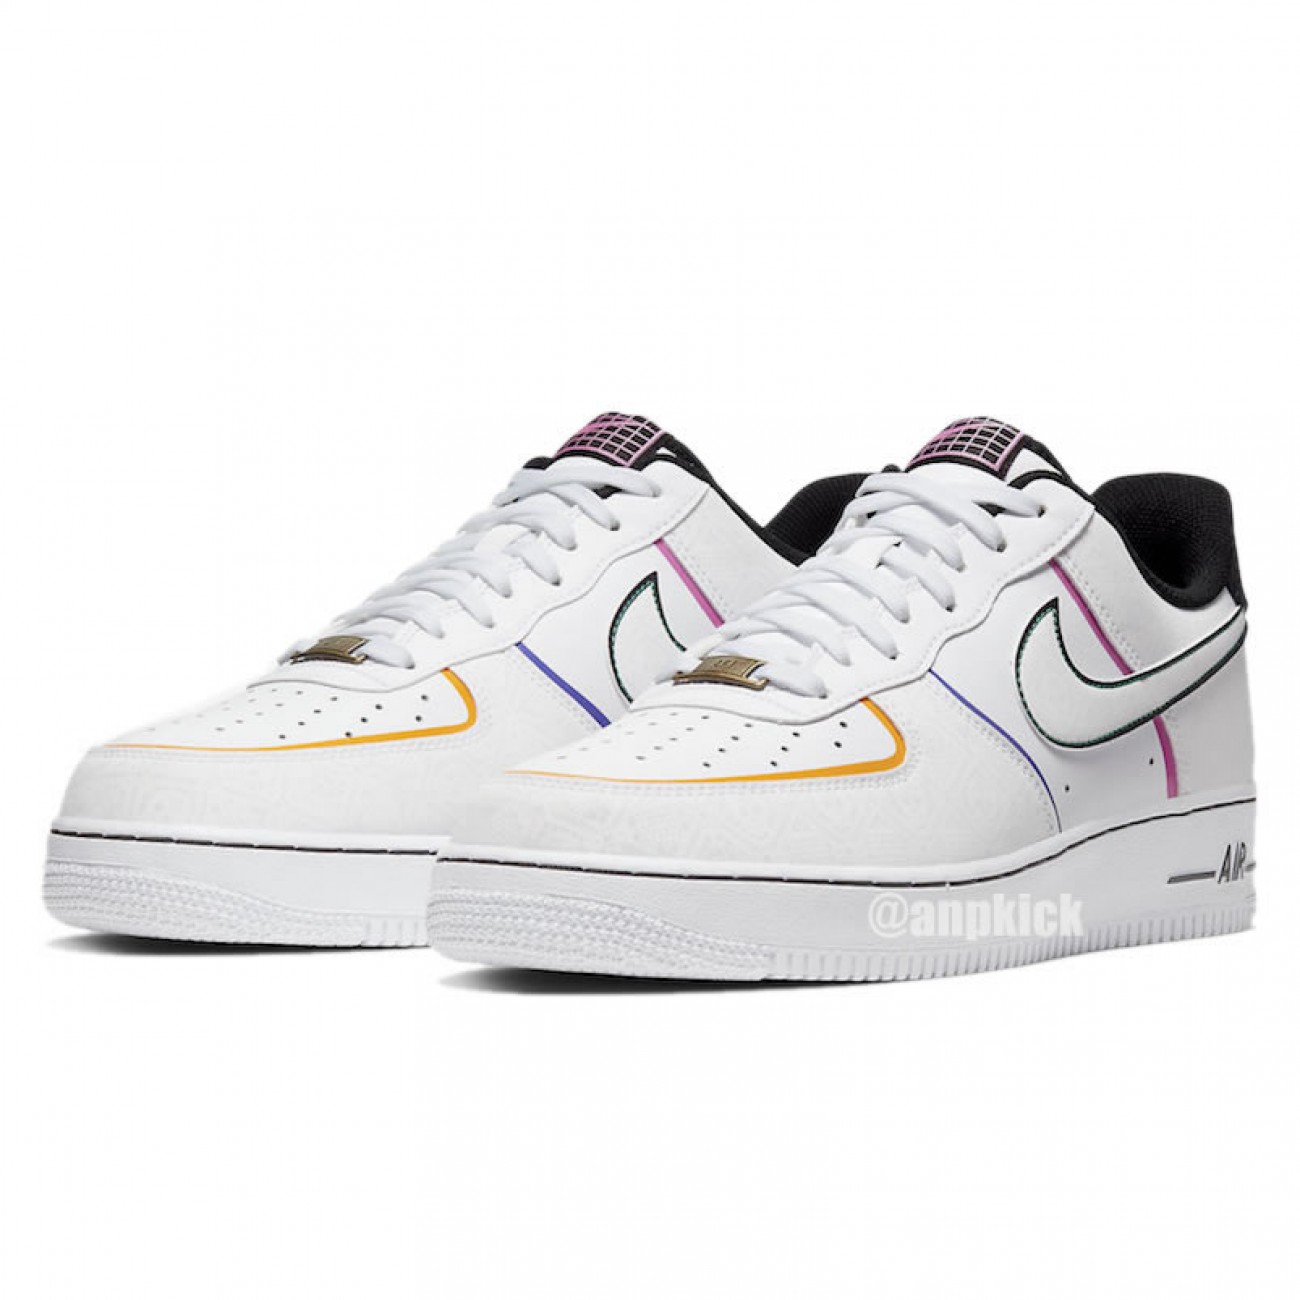 Nike Air Force 1 Low "Day of the Dead" CT1138-100 Price Release Date